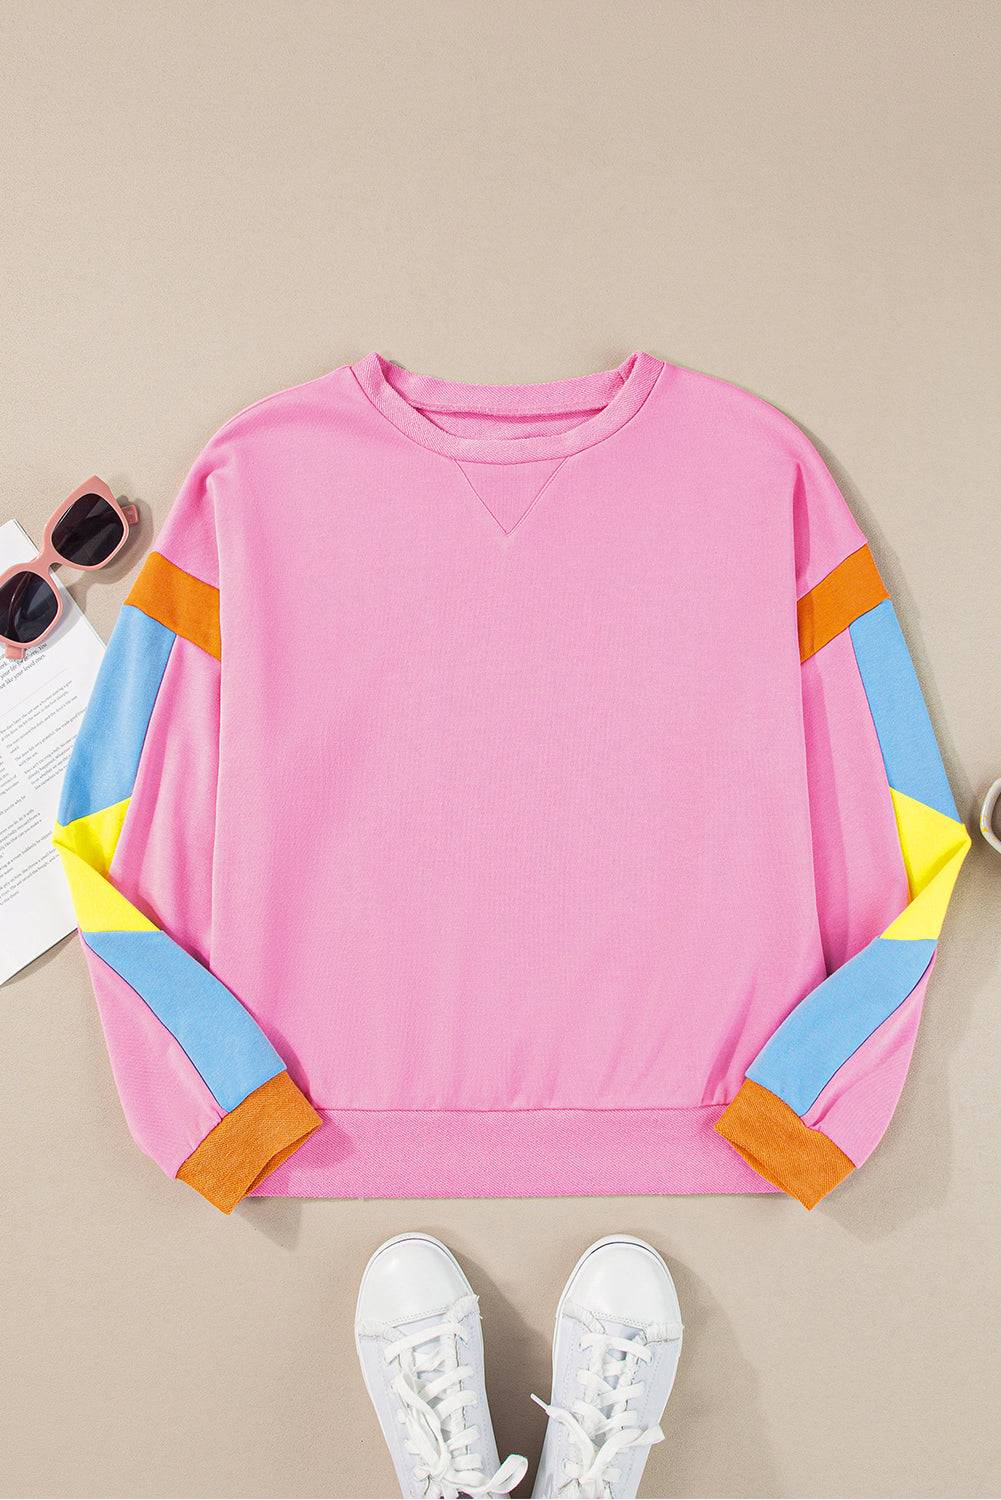 a pink sweater with colorful sleeves and a pair of white sneakers